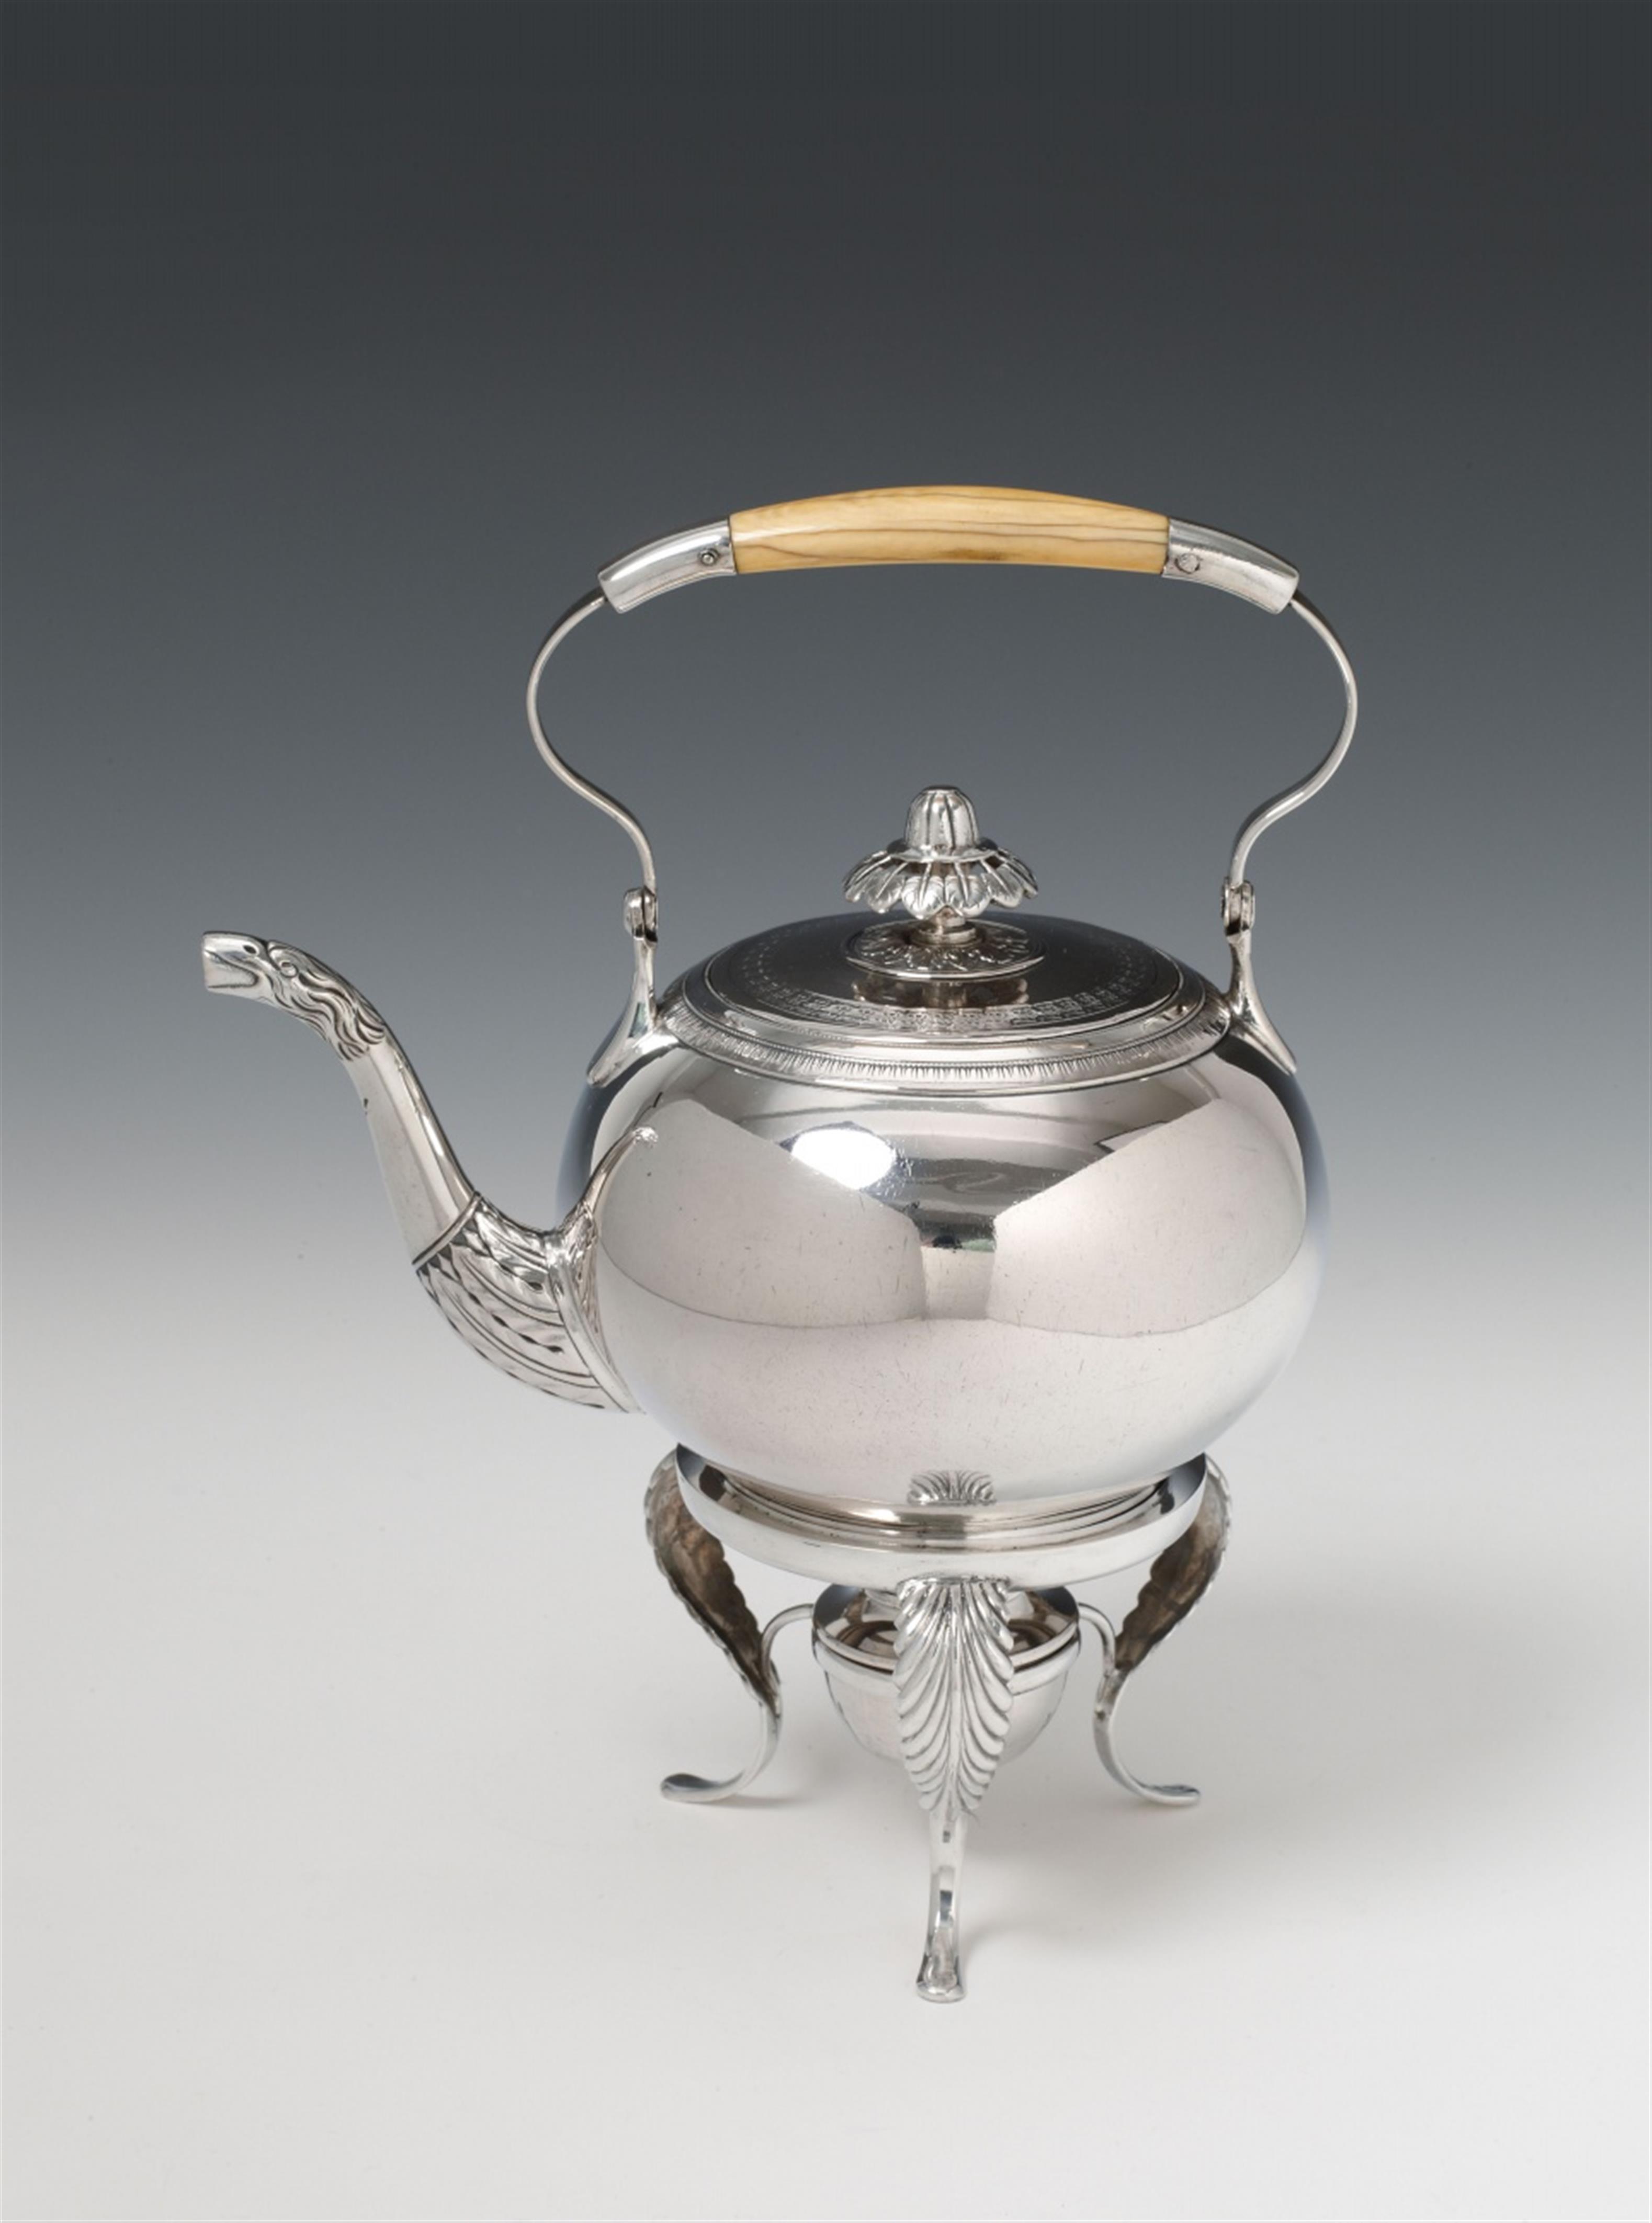 A Berlin silver teapot and rechaud. The teapot with marks of Johann David Hertel, 1819 - 42; the rechaud and lamp probably an addition, with 84 Zolotnik marks. - image-1